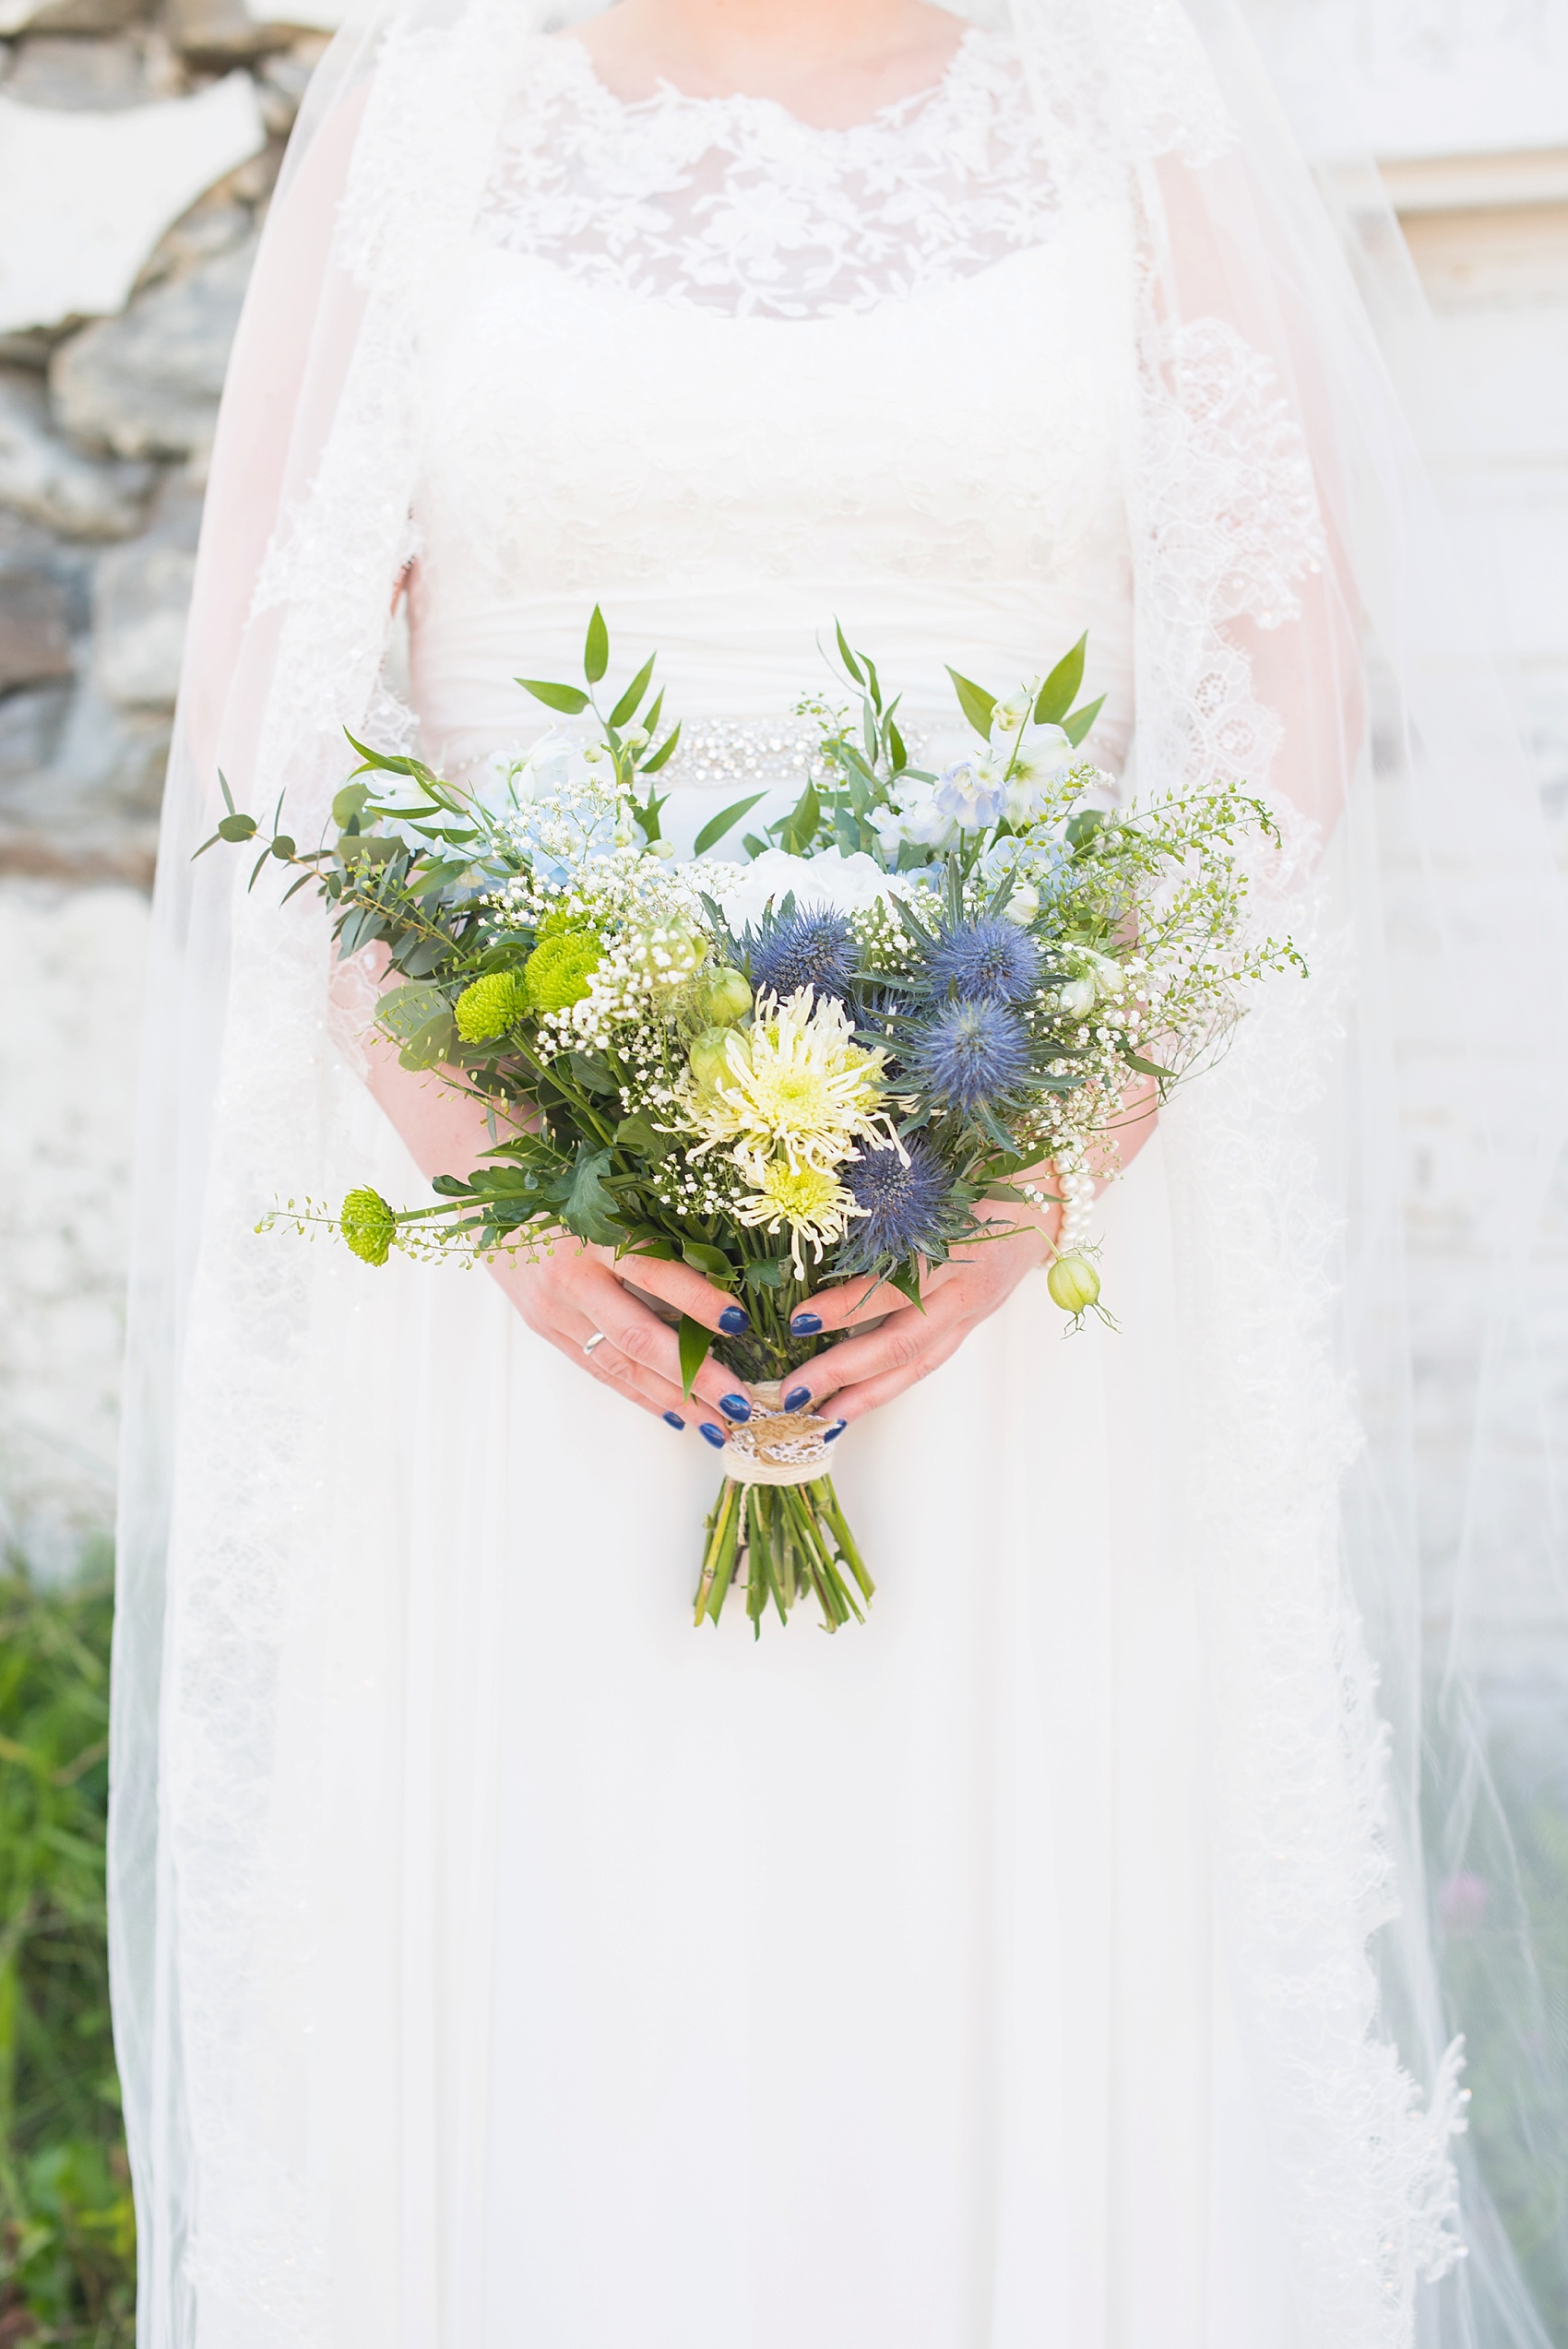 Norway wedding photos by Mikkel Paige Photography, destination wedding photographer. Rustic blue, white and green bouquet with mums and blue thistle tied with twine.